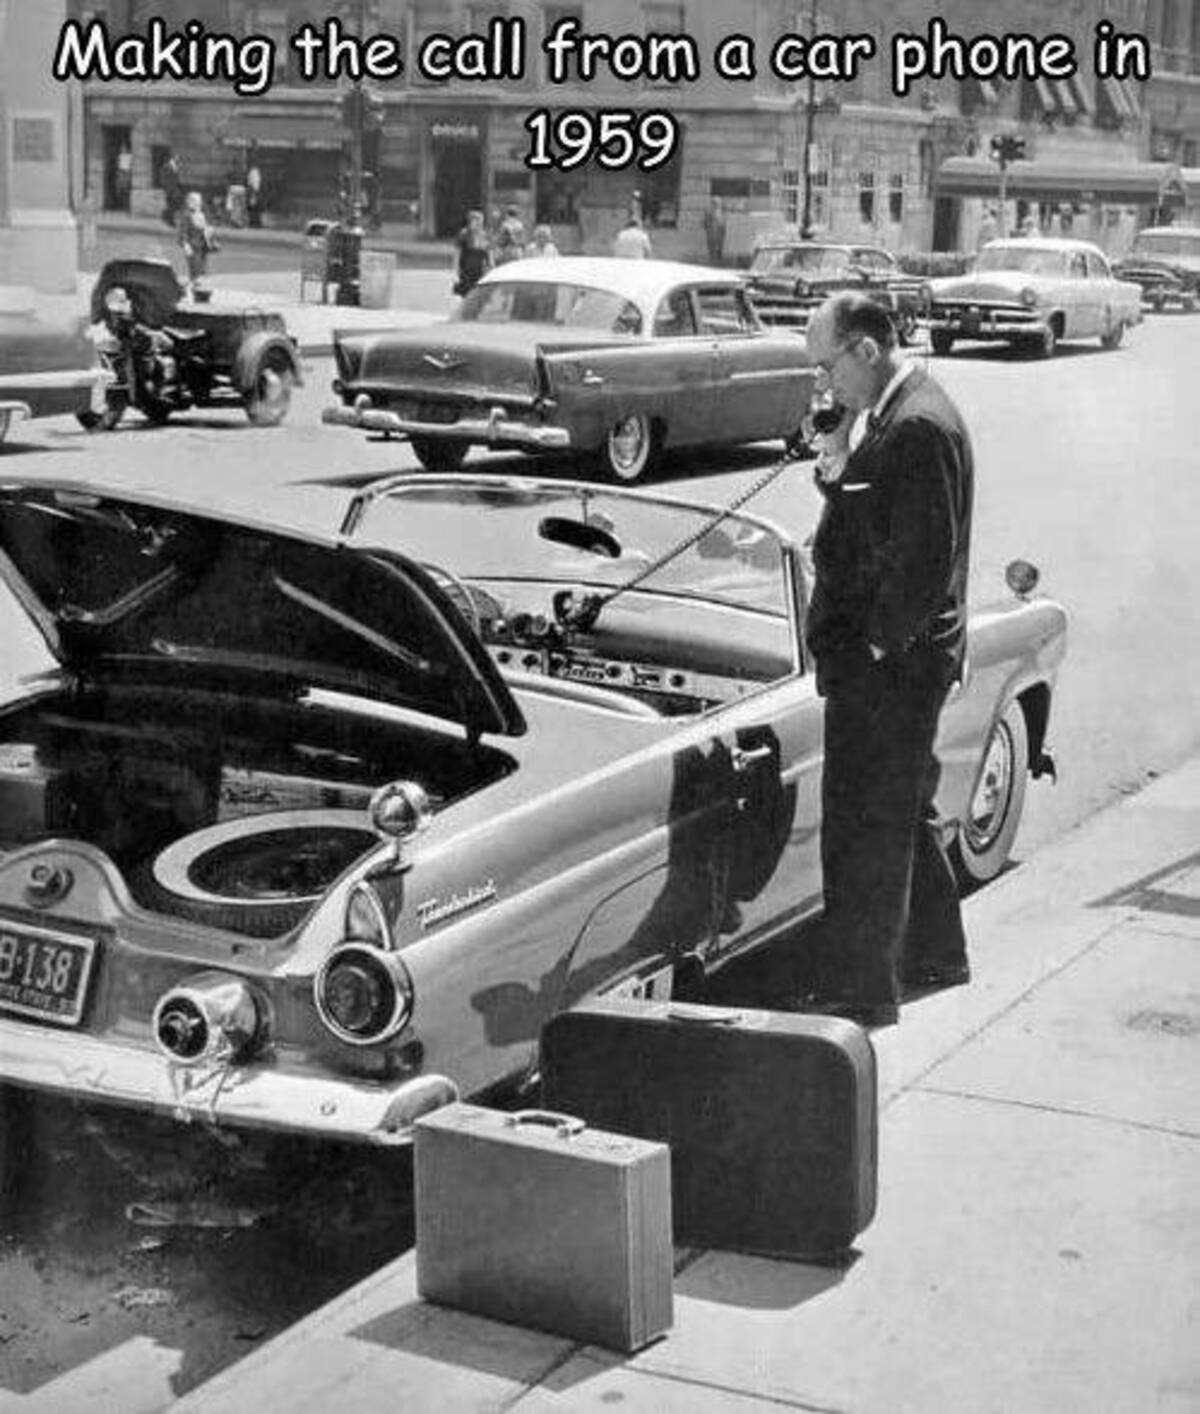 1959 usa - Making the call from a car phone in 1959 B138